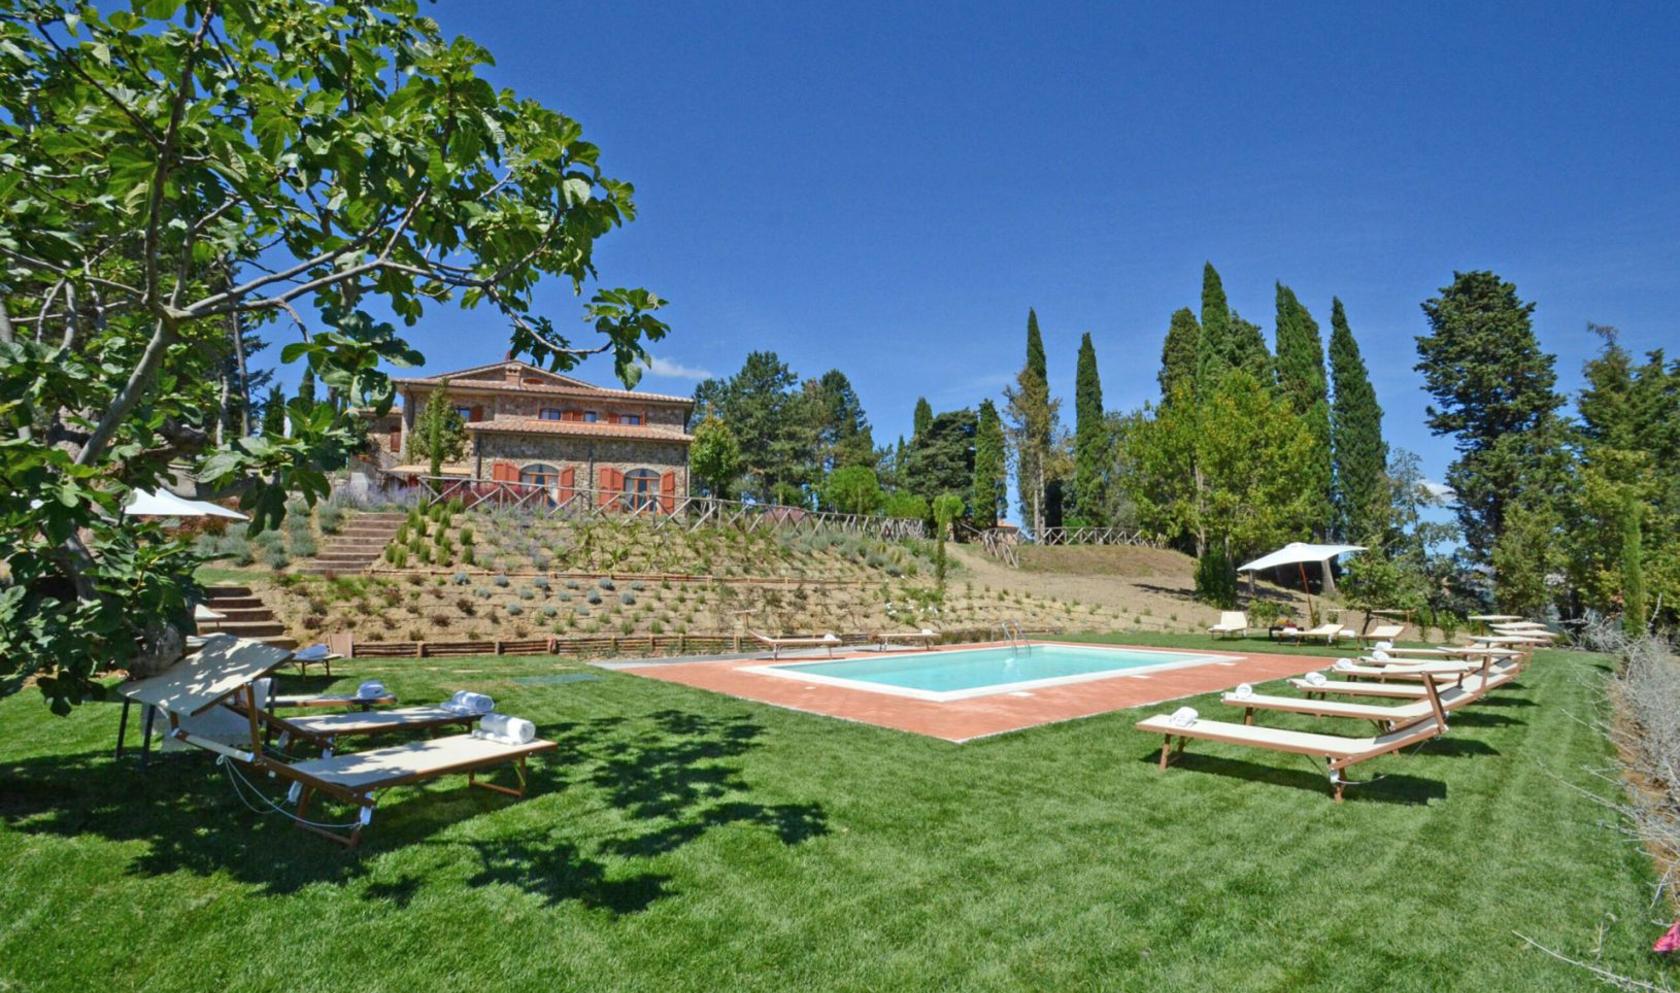 Toscana Immobiliare - Farm with farmhouse, annexe, pool, 25 ha of land and panoramic views for sale in Tuscany